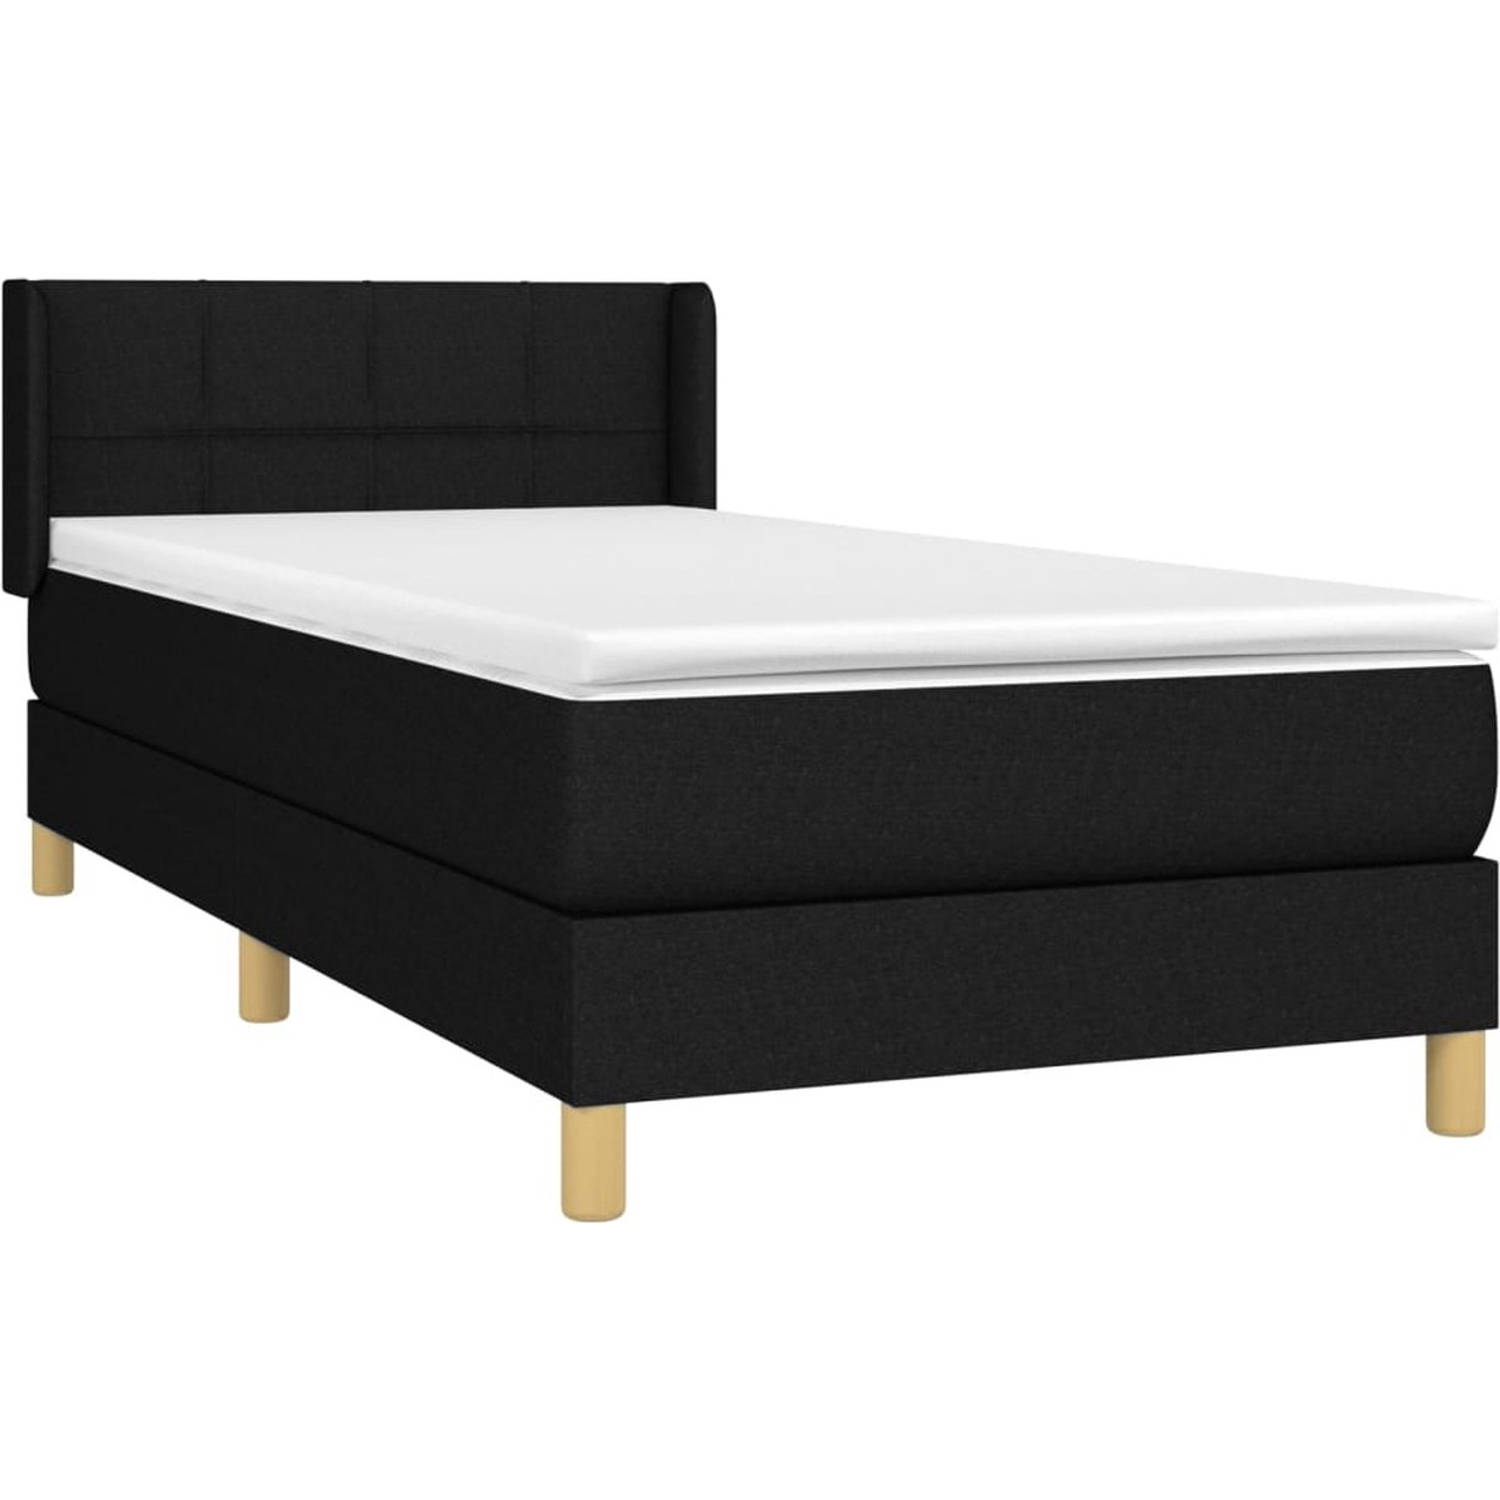 The Living Store Boxspringbed - Comfort - Bed - 193 x 93 x 78/88 cm - Zwart